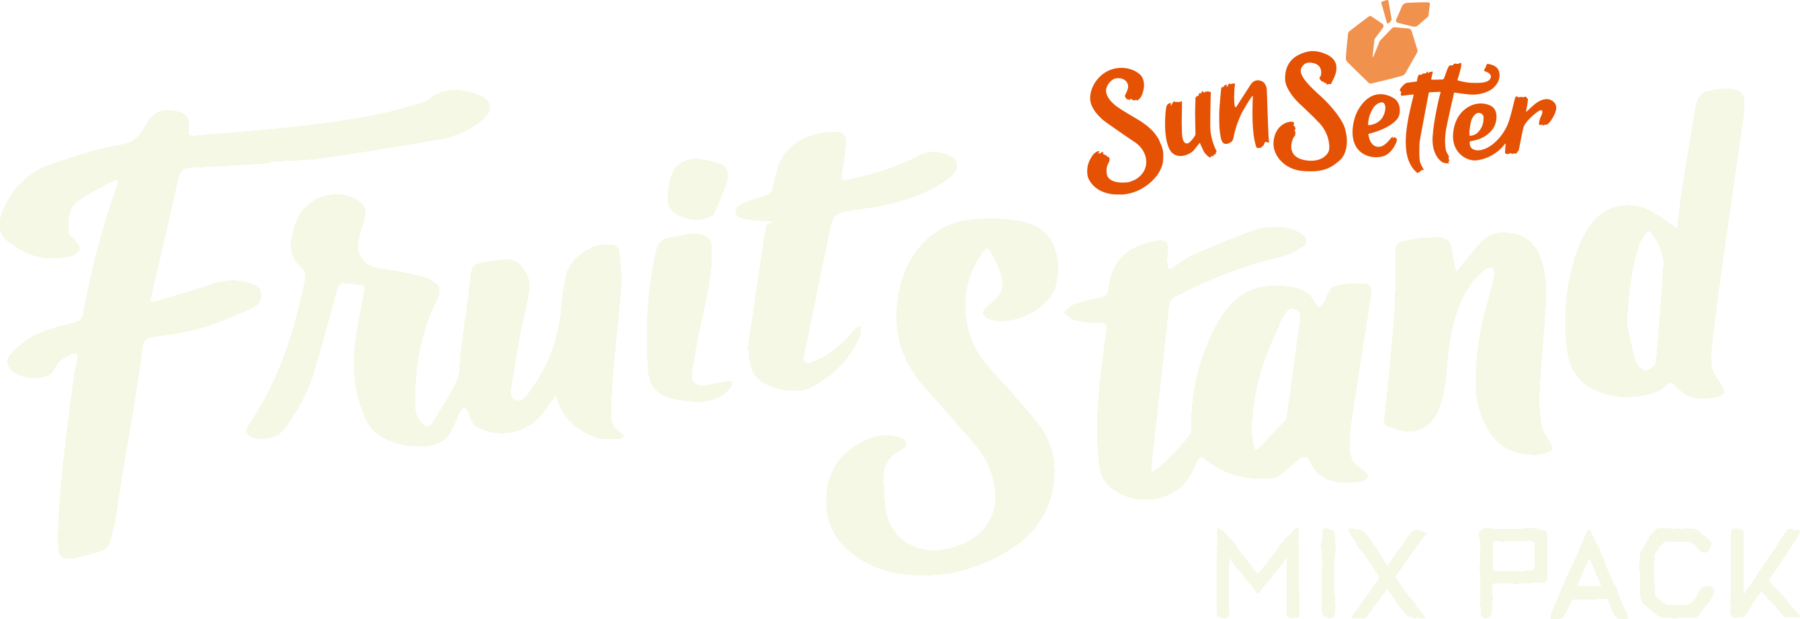 SunSetter Fruit Stand Mix Pack Logo - Stanley Park Brewing